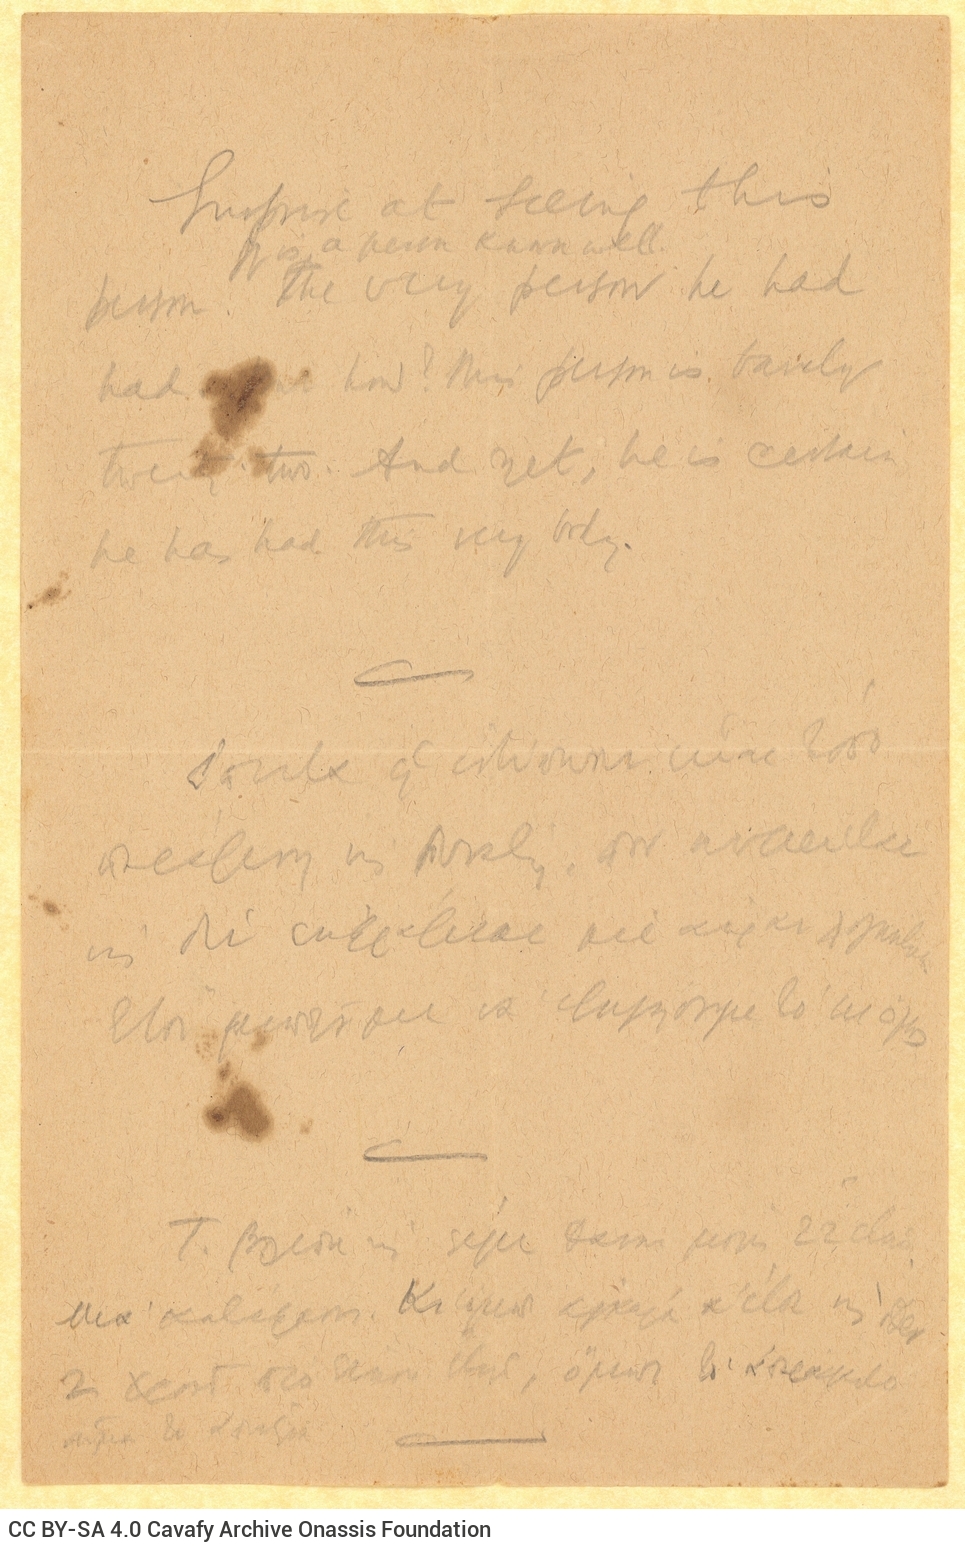 Handwritten notes on both sides of a sheet. Cavafy's comments on one of his poems.